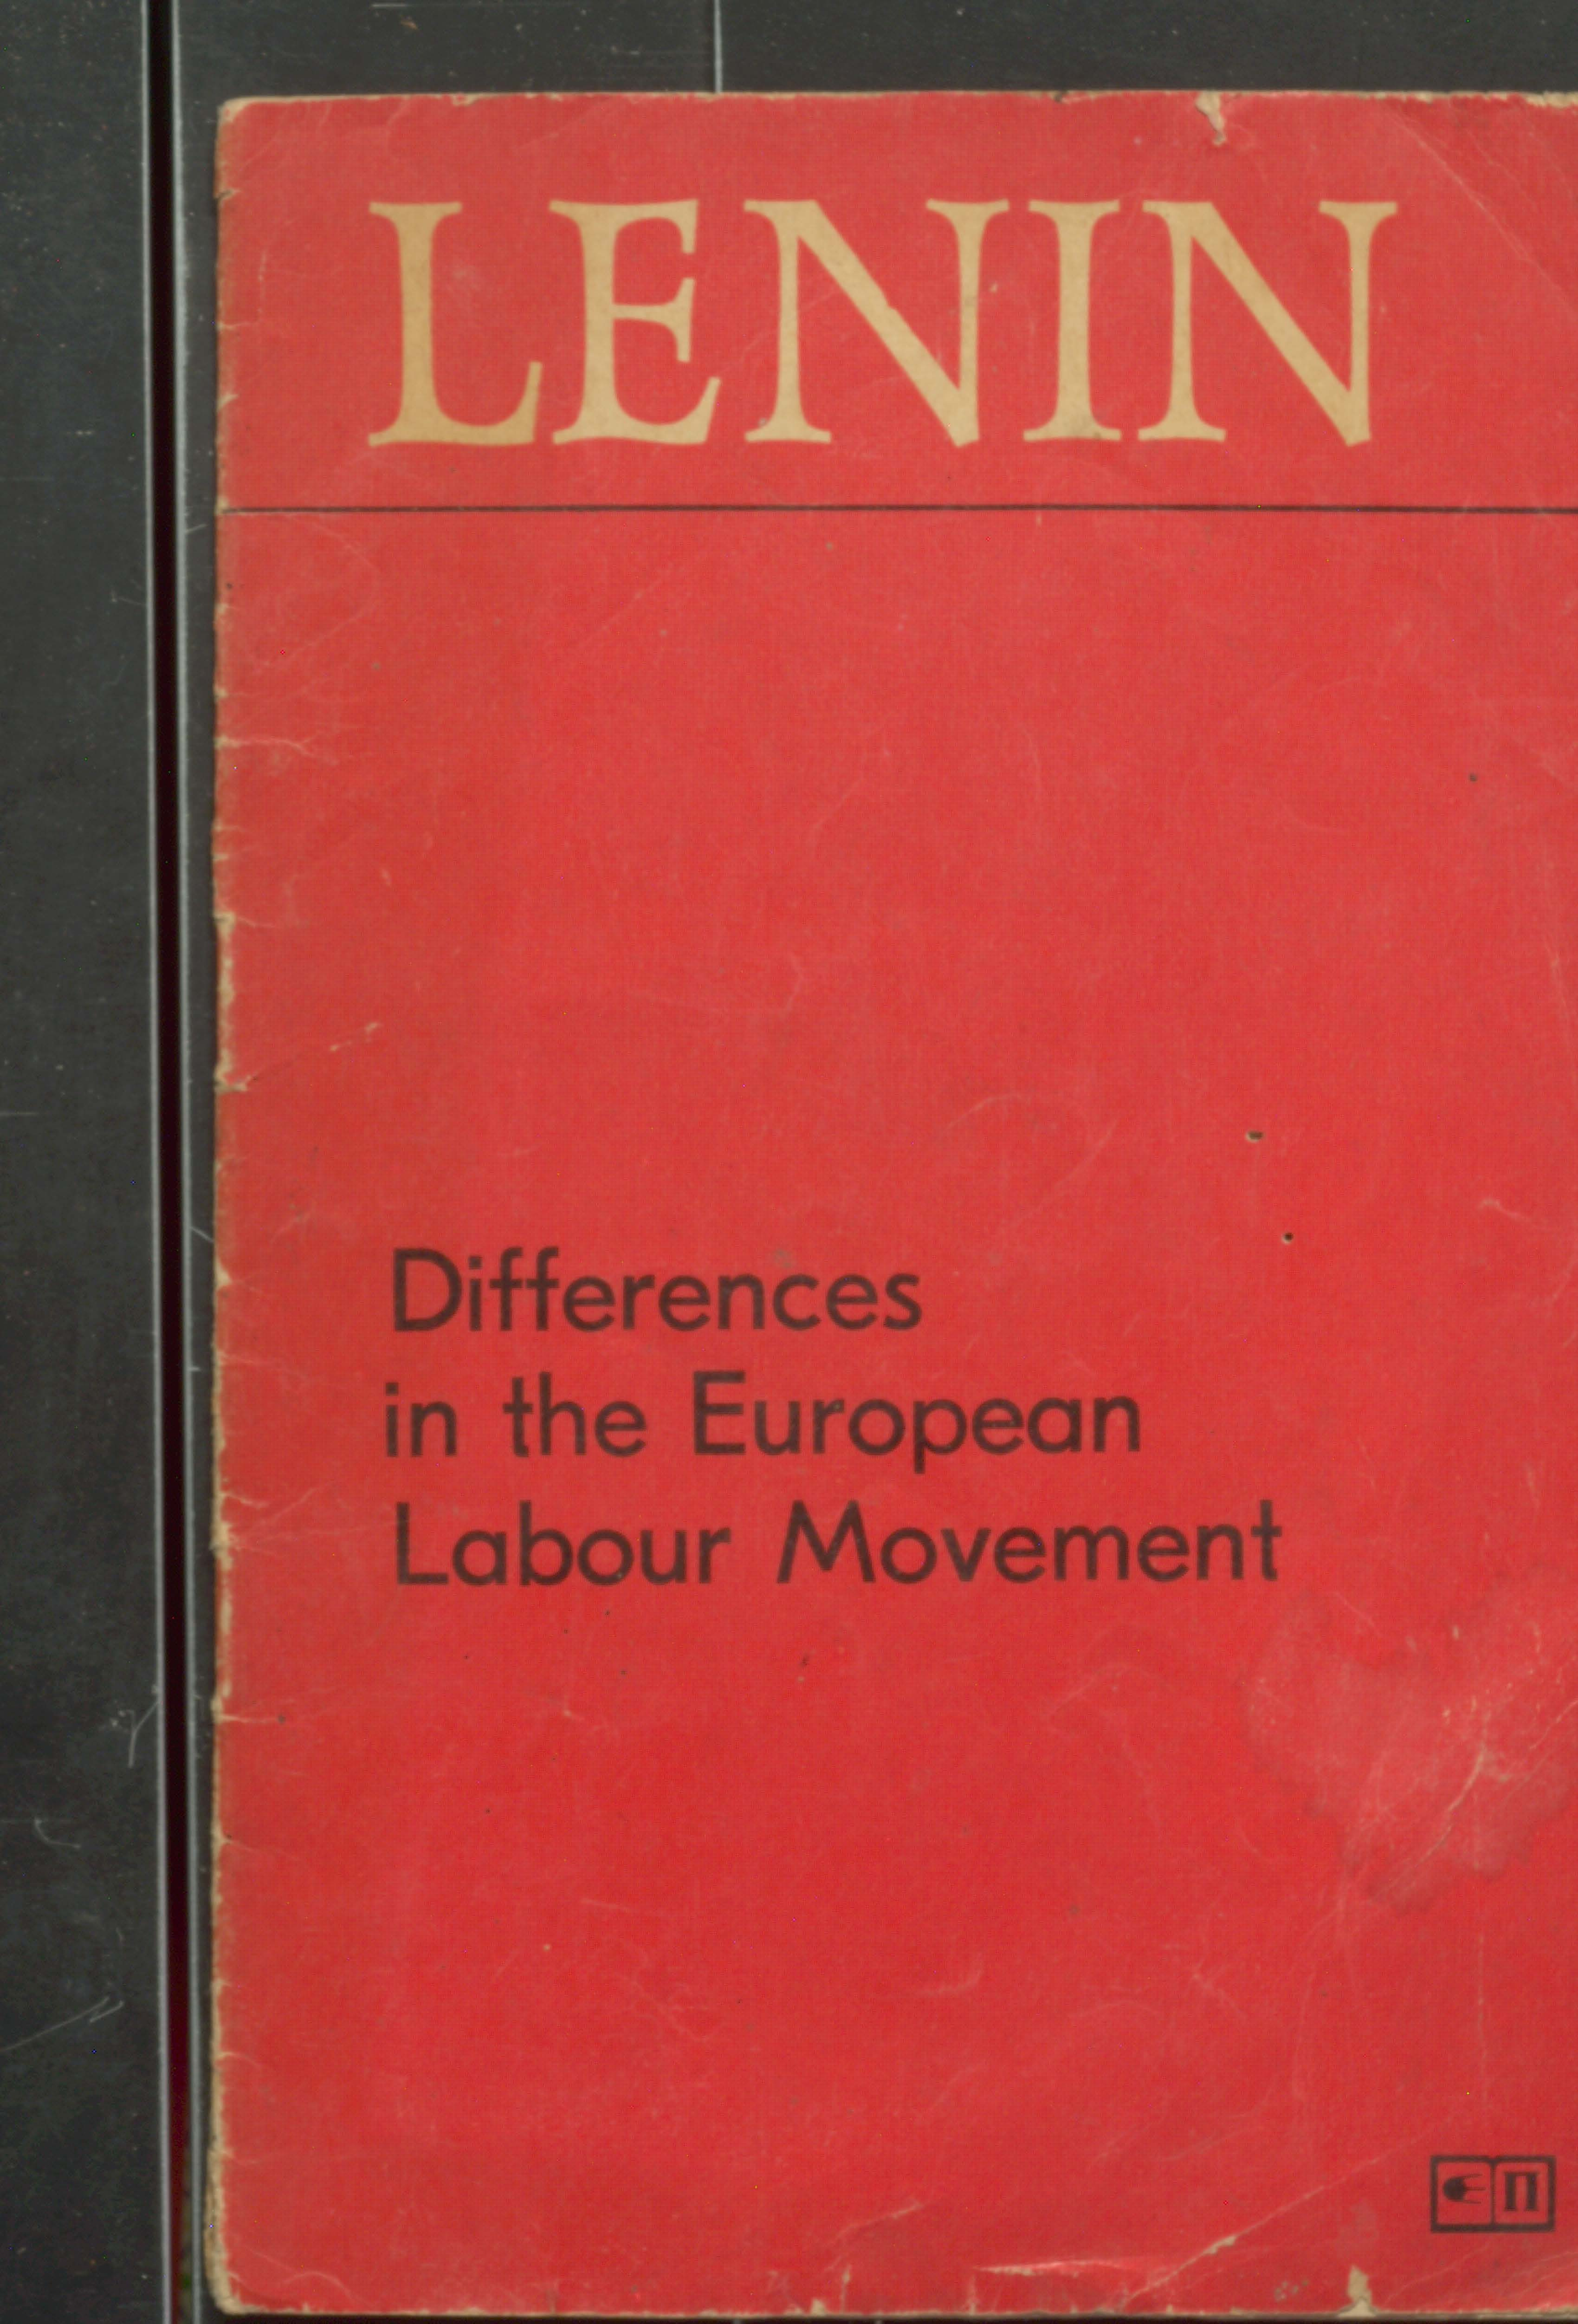 LENIN DIFFERENCES IN THE EUROPEAN LABOUR MOVEMENT